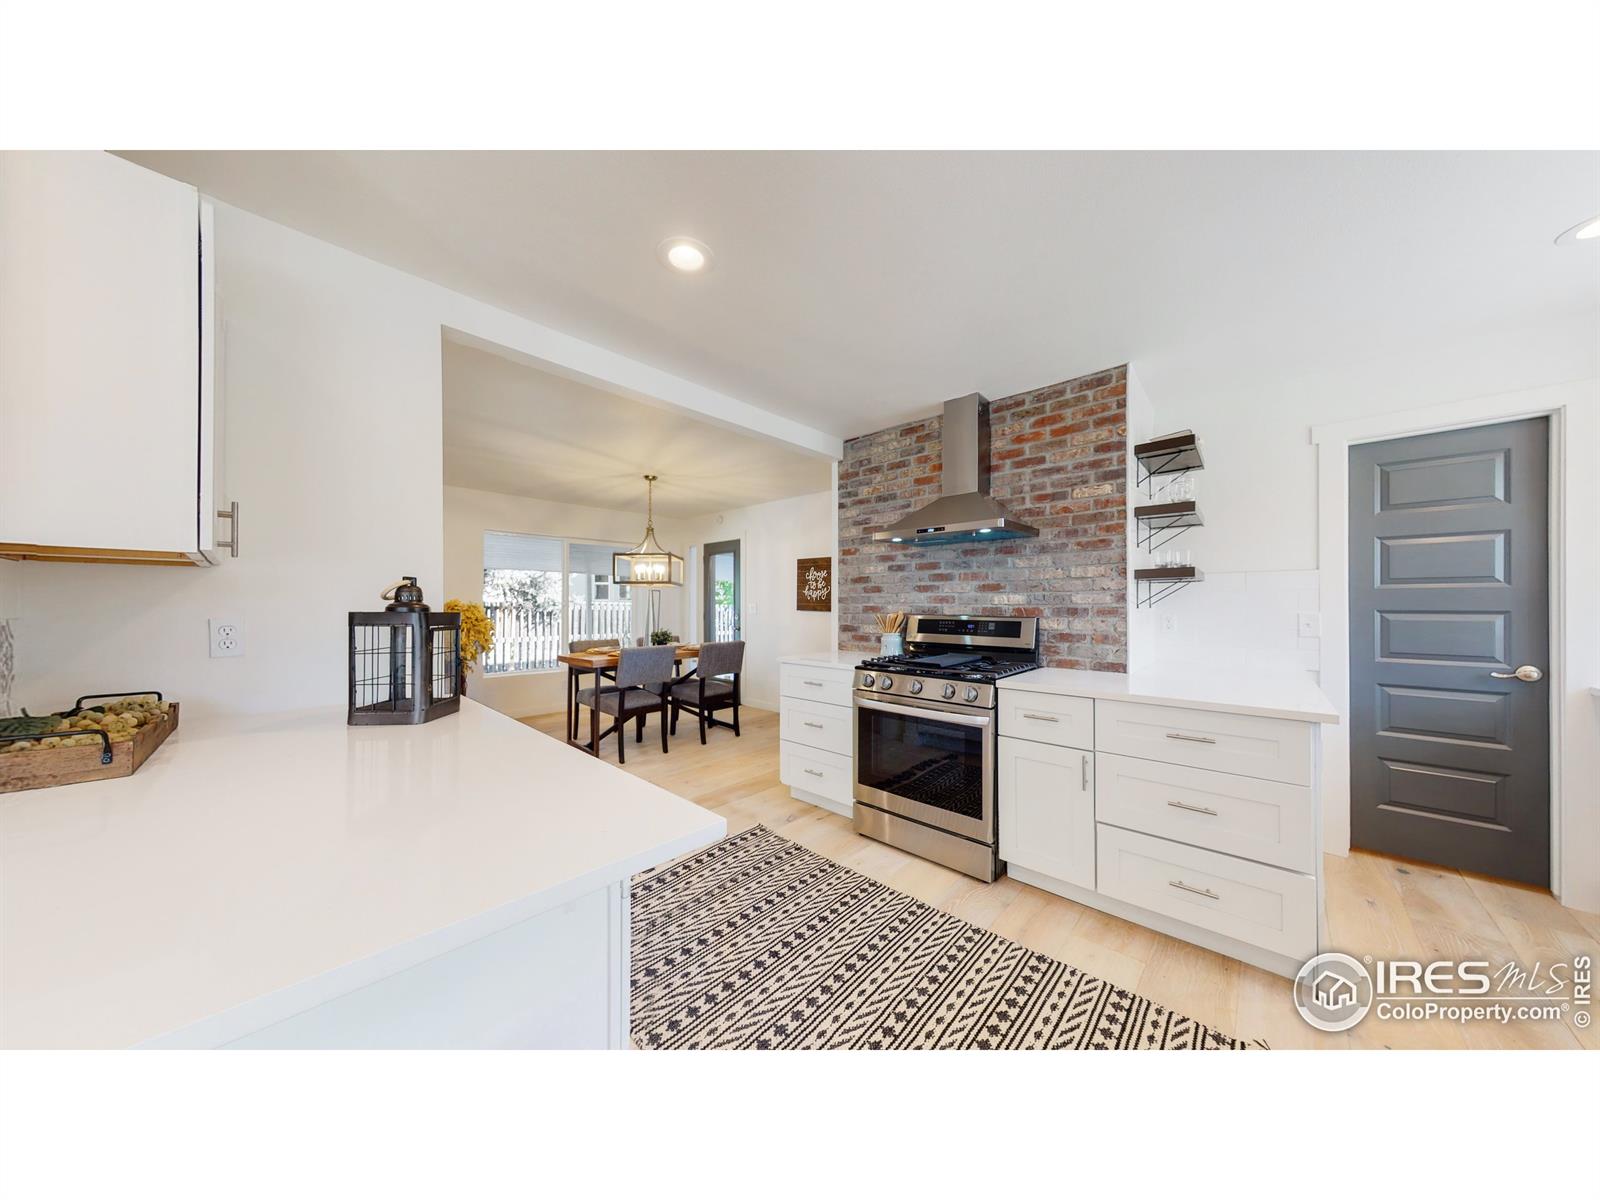 5213 Fossil Ridge, Fort Collins, CO